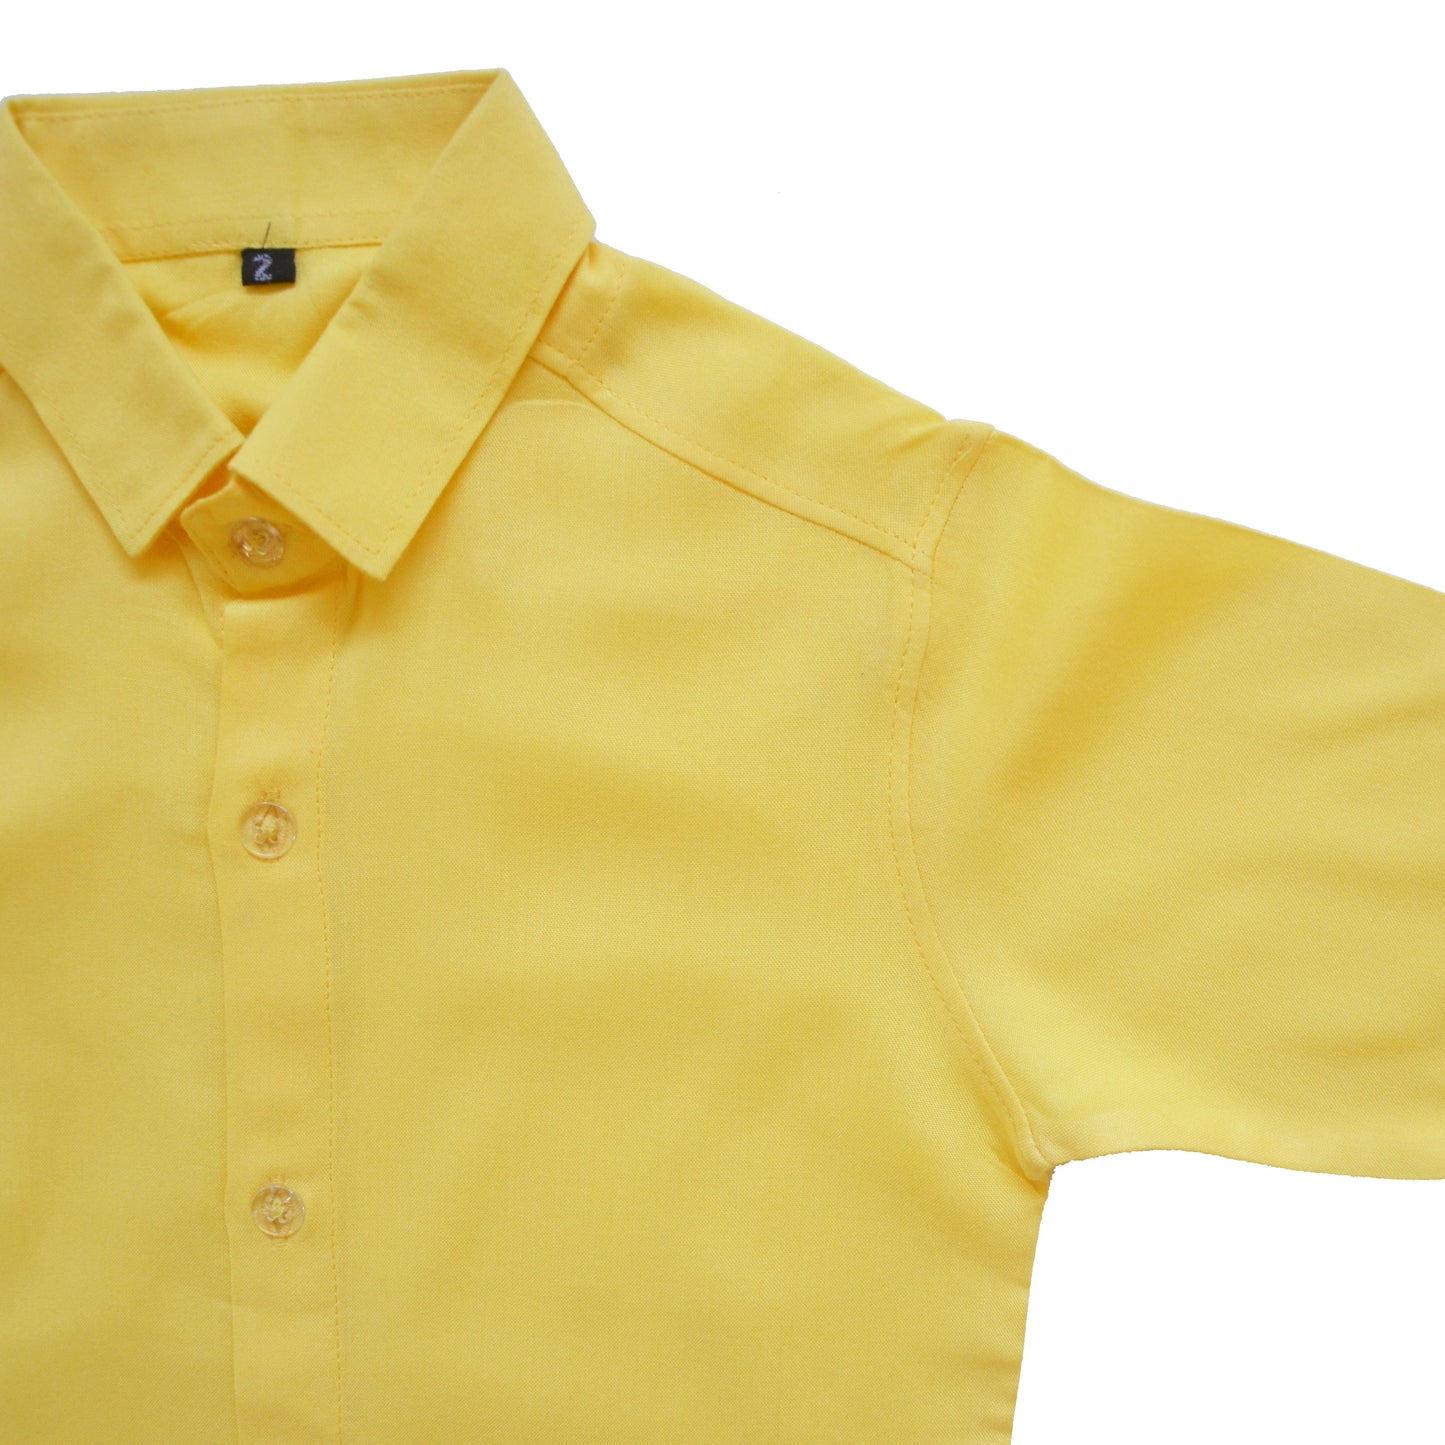 Pastel shade rayon rolled up sleeve shirt for boys - Yellow